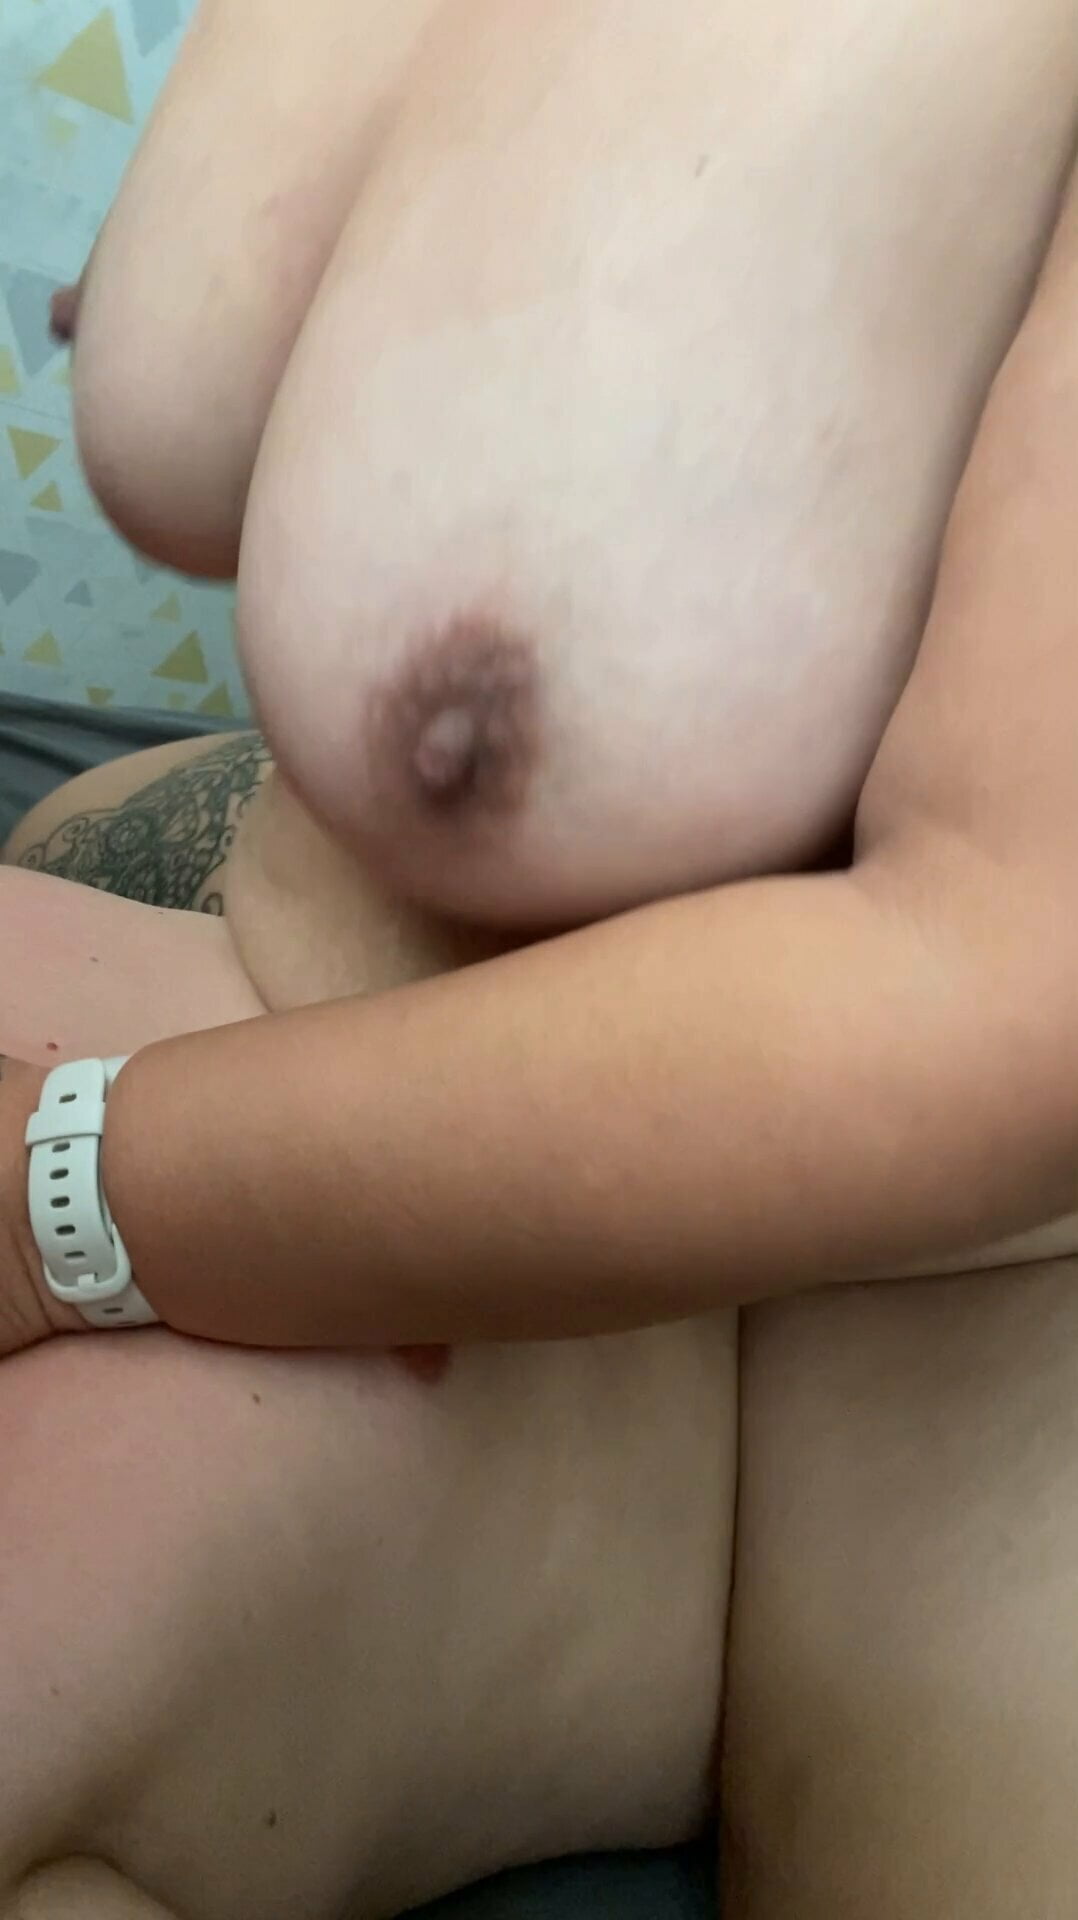 Dirty Talking British BBW Slutwife Tells Cuck Hubby She Wants Other Men To Creampie Her Ass & Leave It Gaping For Him